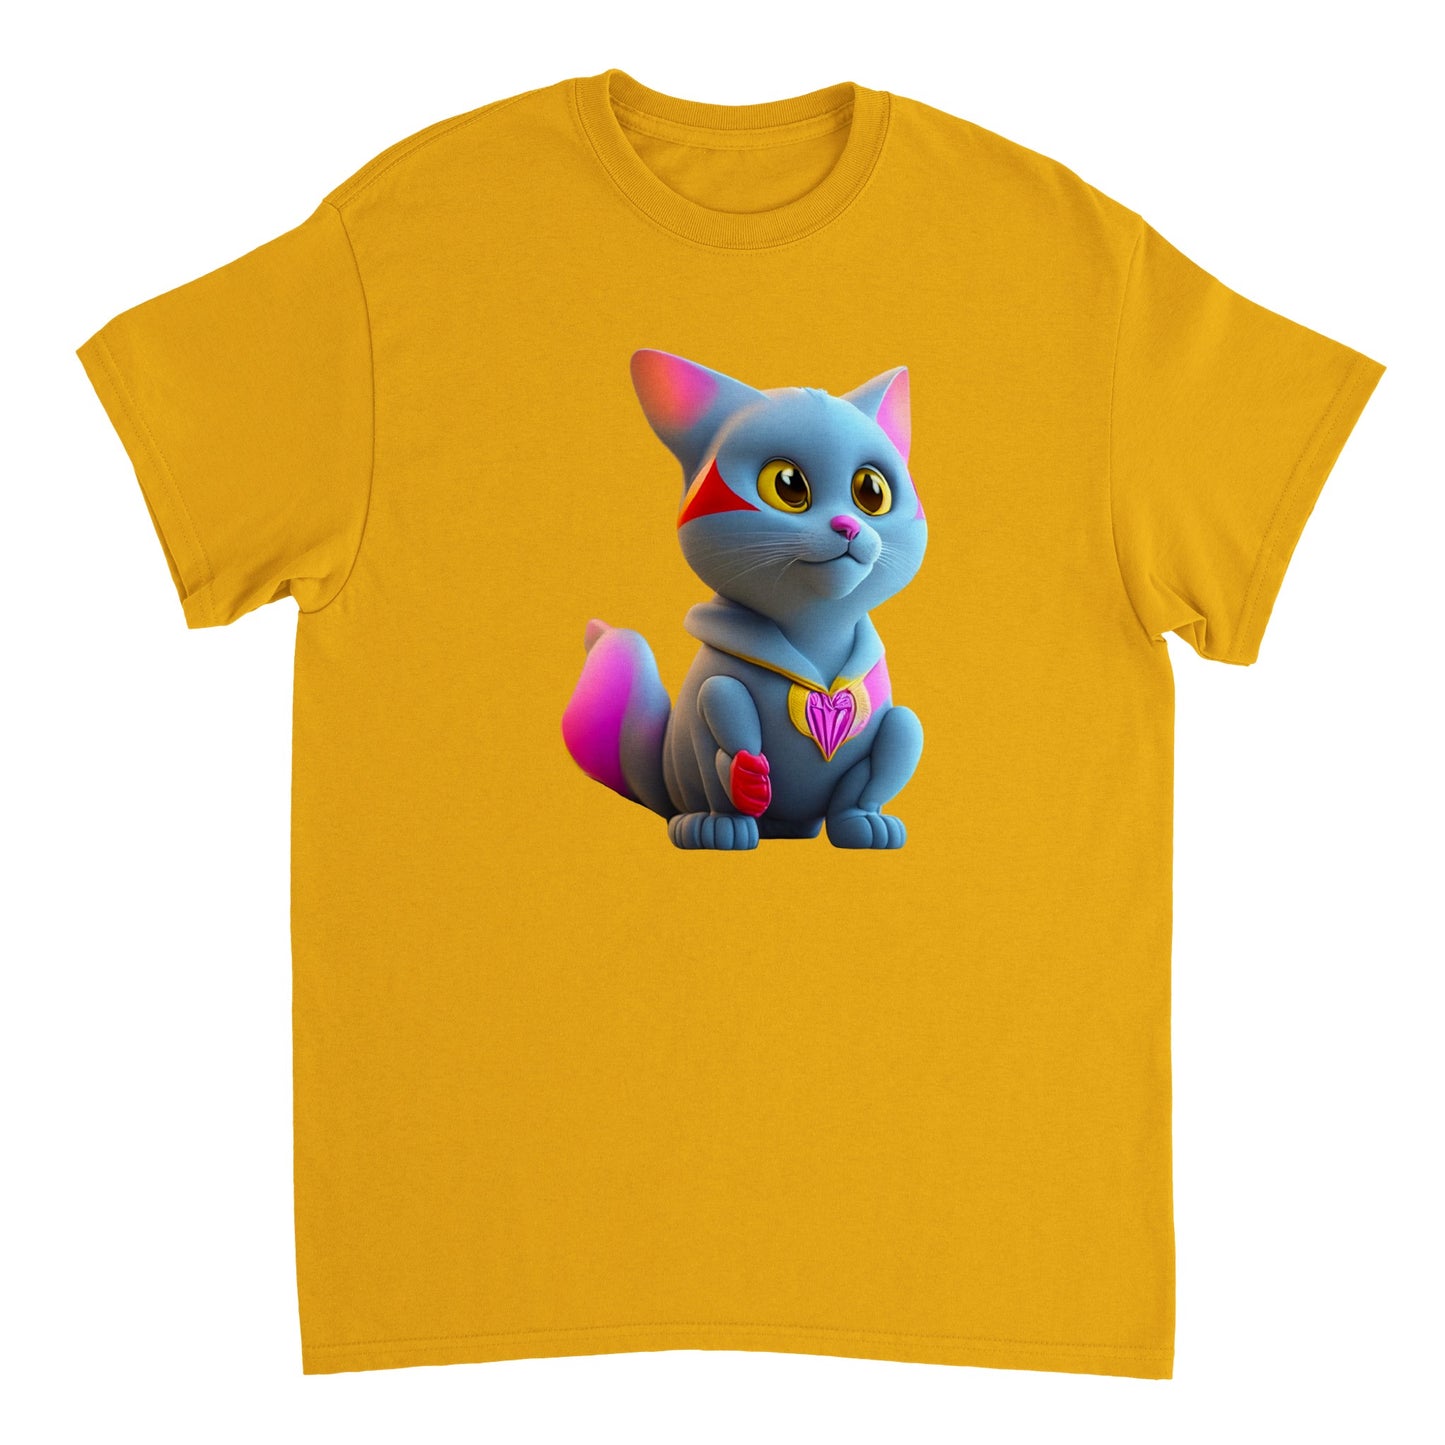 Adorable, Cool, Cute Cats and Kittens Toy - Heavyweight Unisex Crewneck T-shirt 63